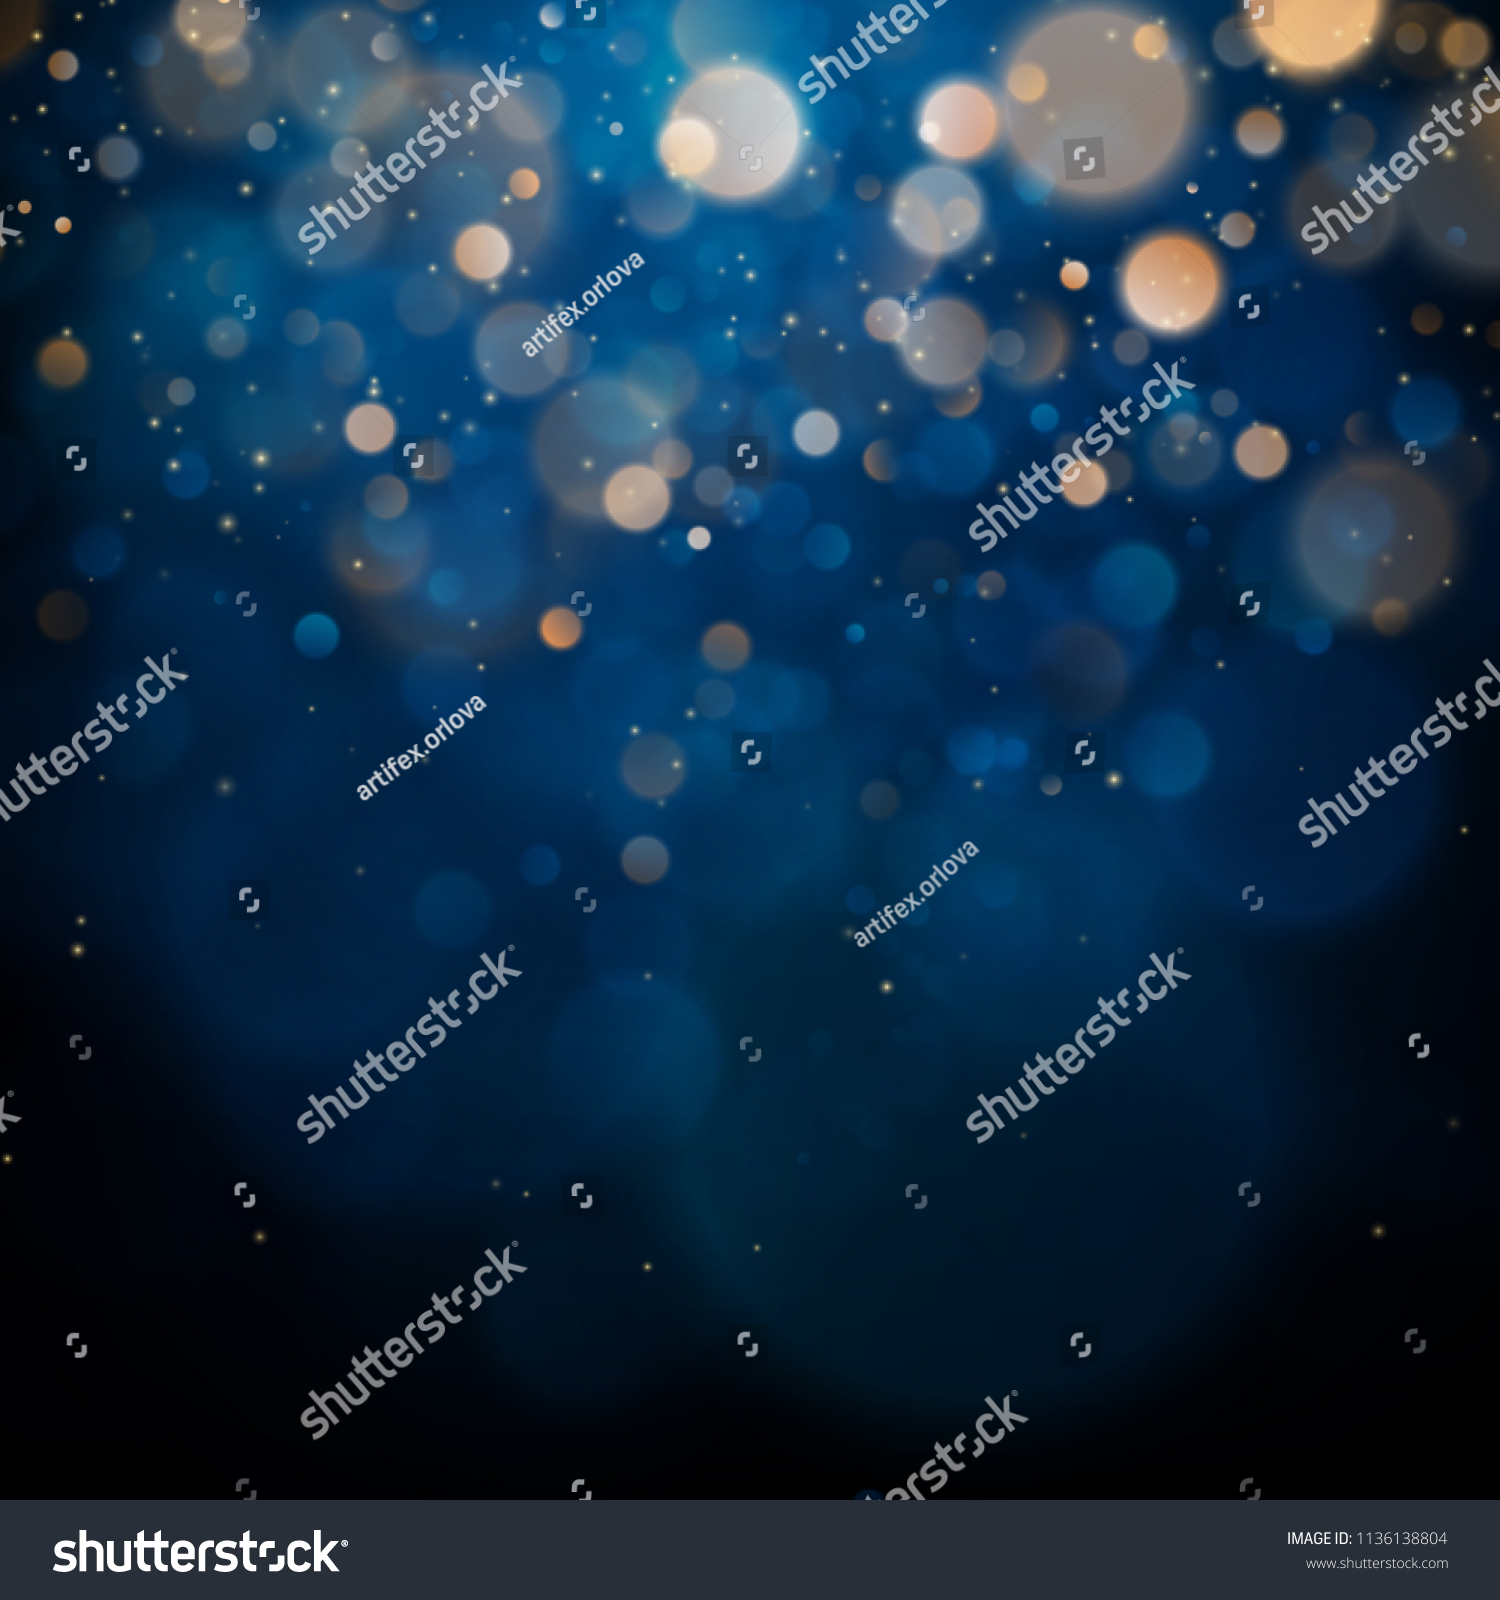 Blurred bokeh light on dark blue background. Christmas and New Year holidays template. Abstract glitter defocused blinking stars and sparks. EPS 10 #1136138804